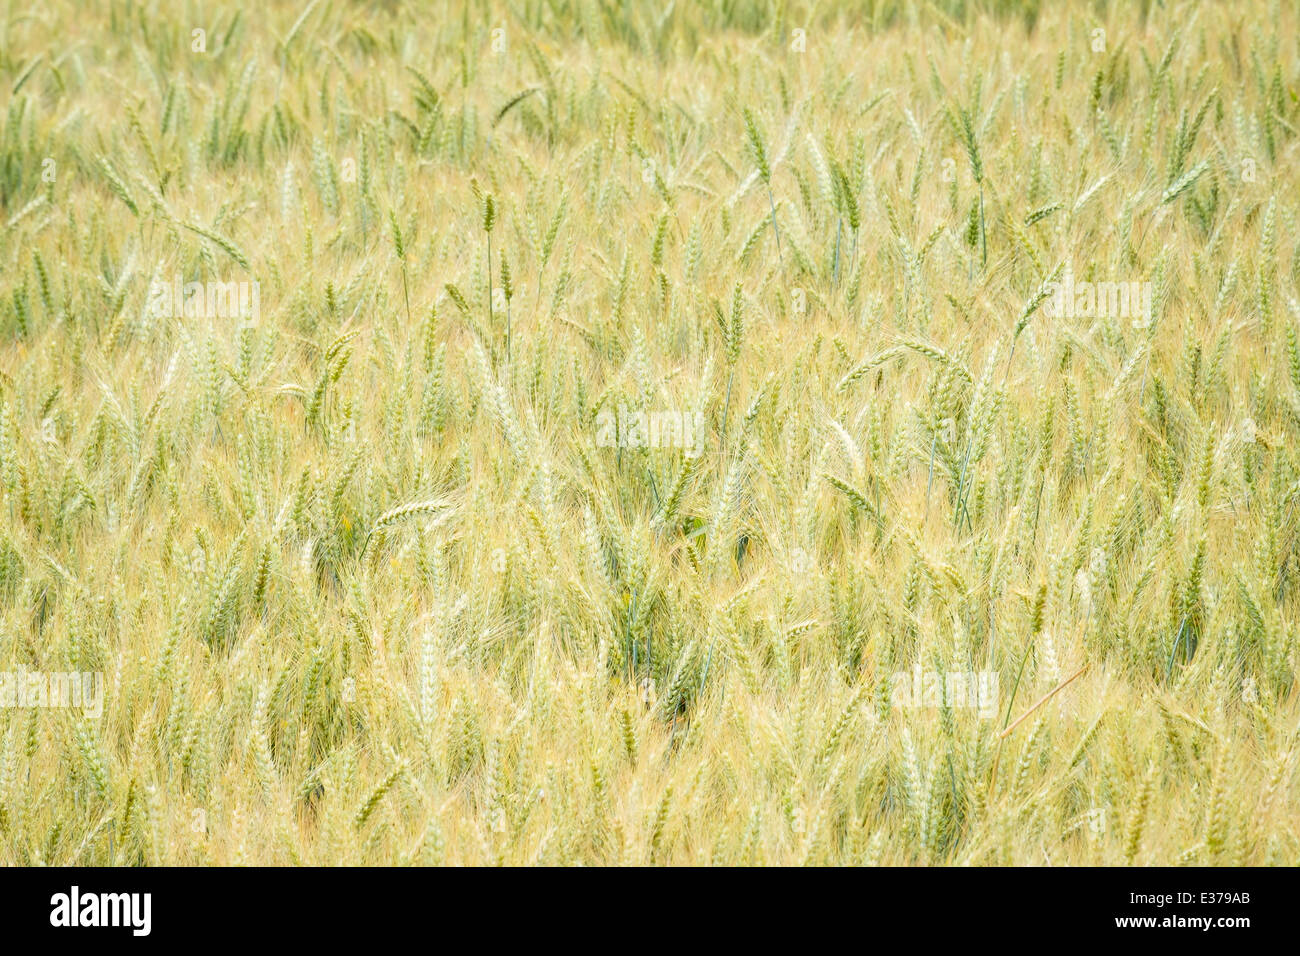 Crop of wheat in the Willamette Valley, Oregon Stock Photo